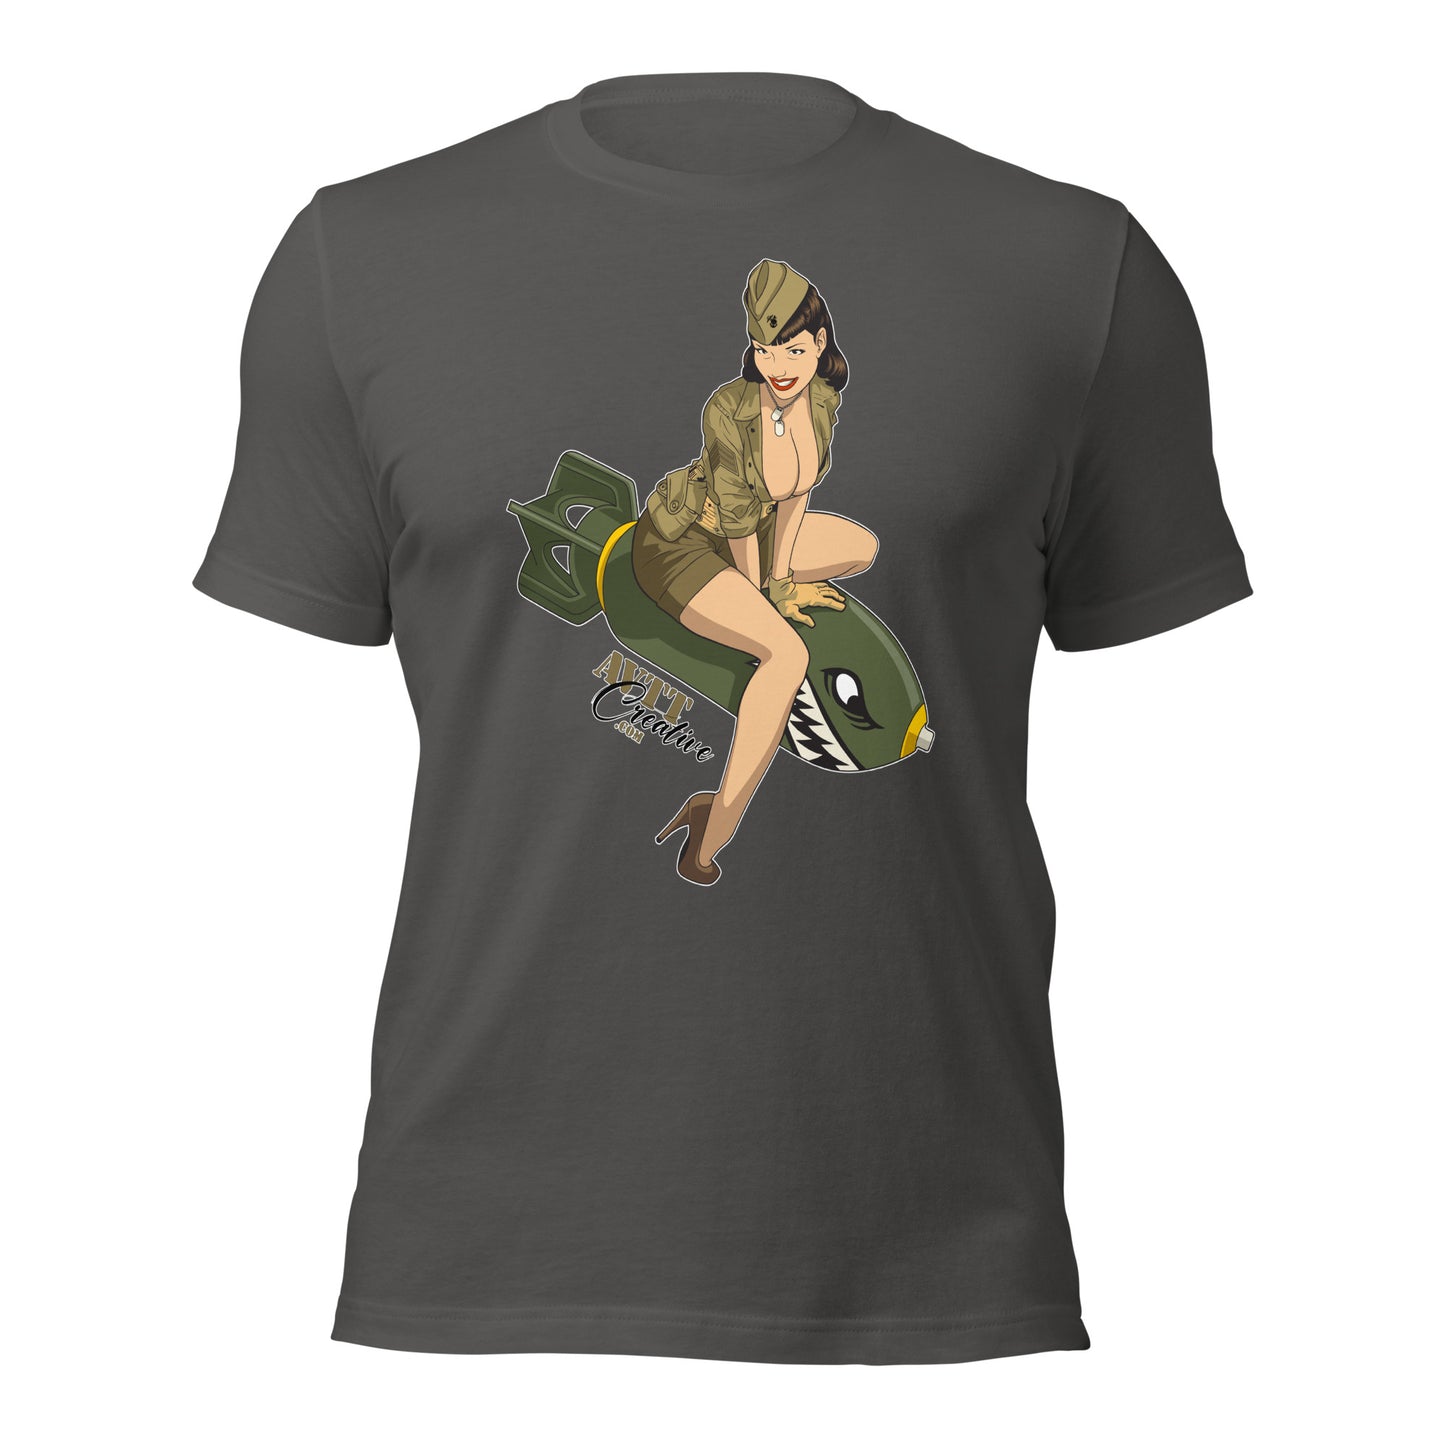 Coming in Hot Unisex t-shirt